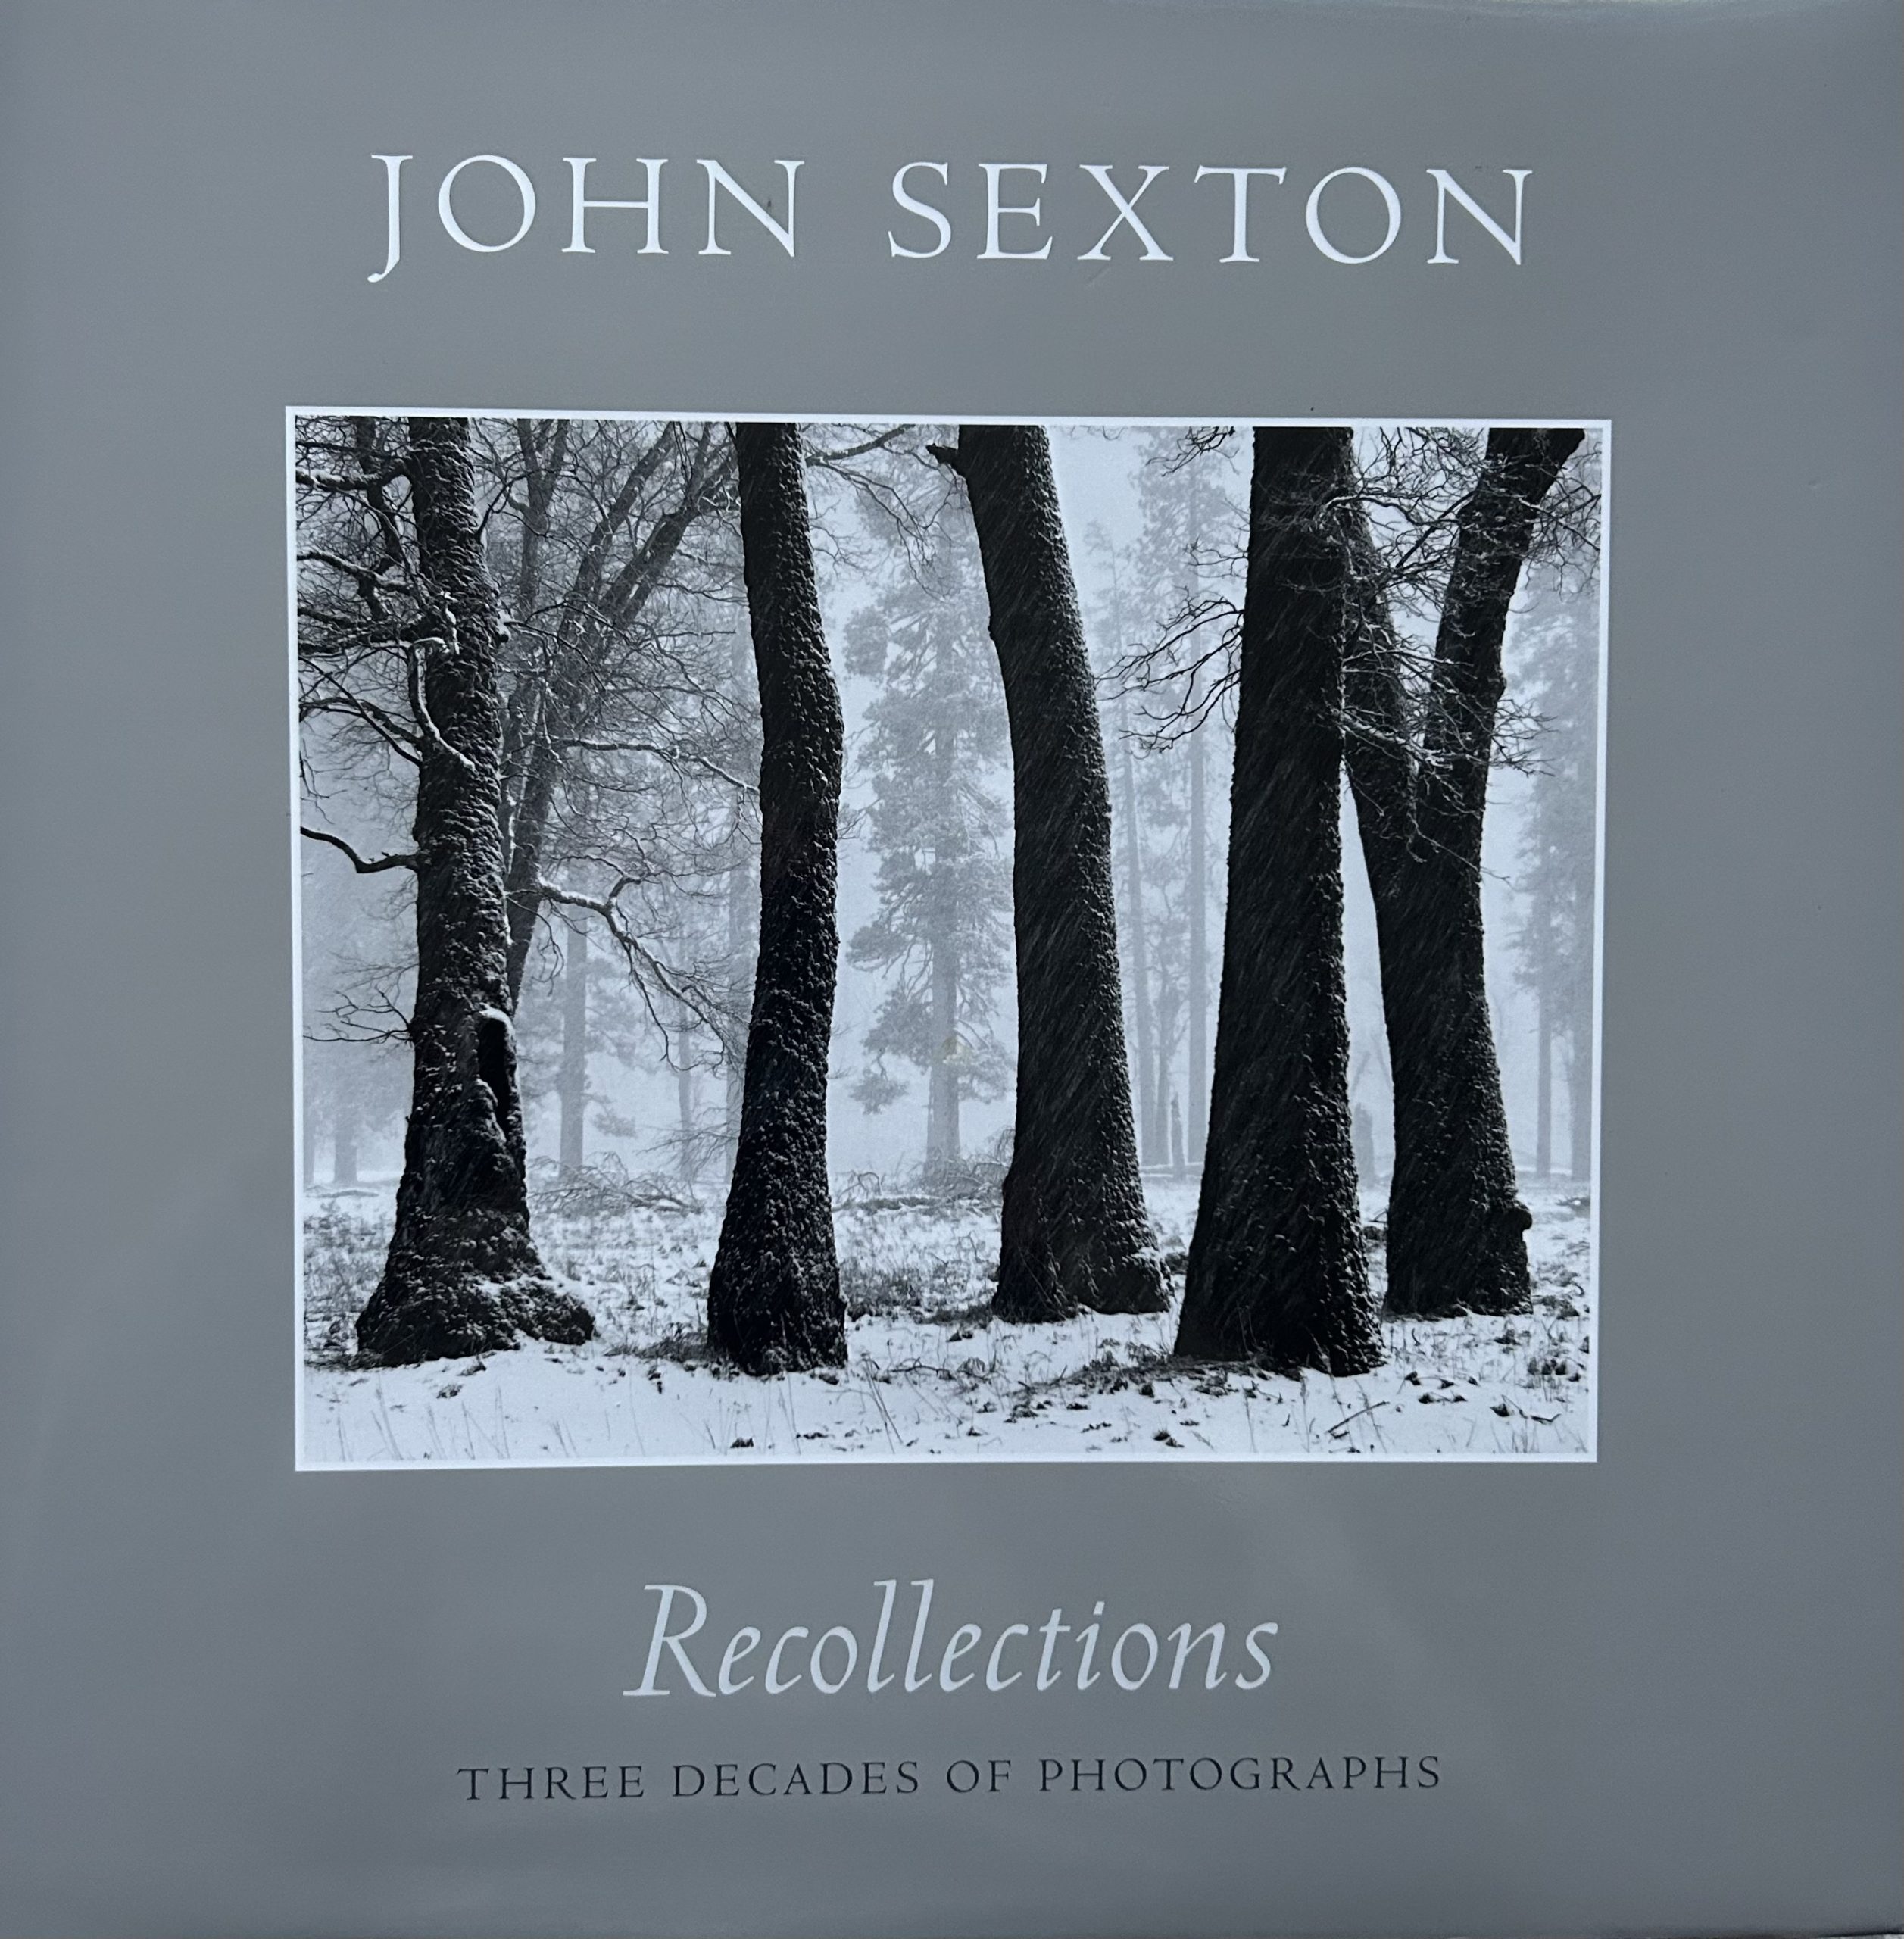 Recollections: Three Decades of Photography by John Sexton